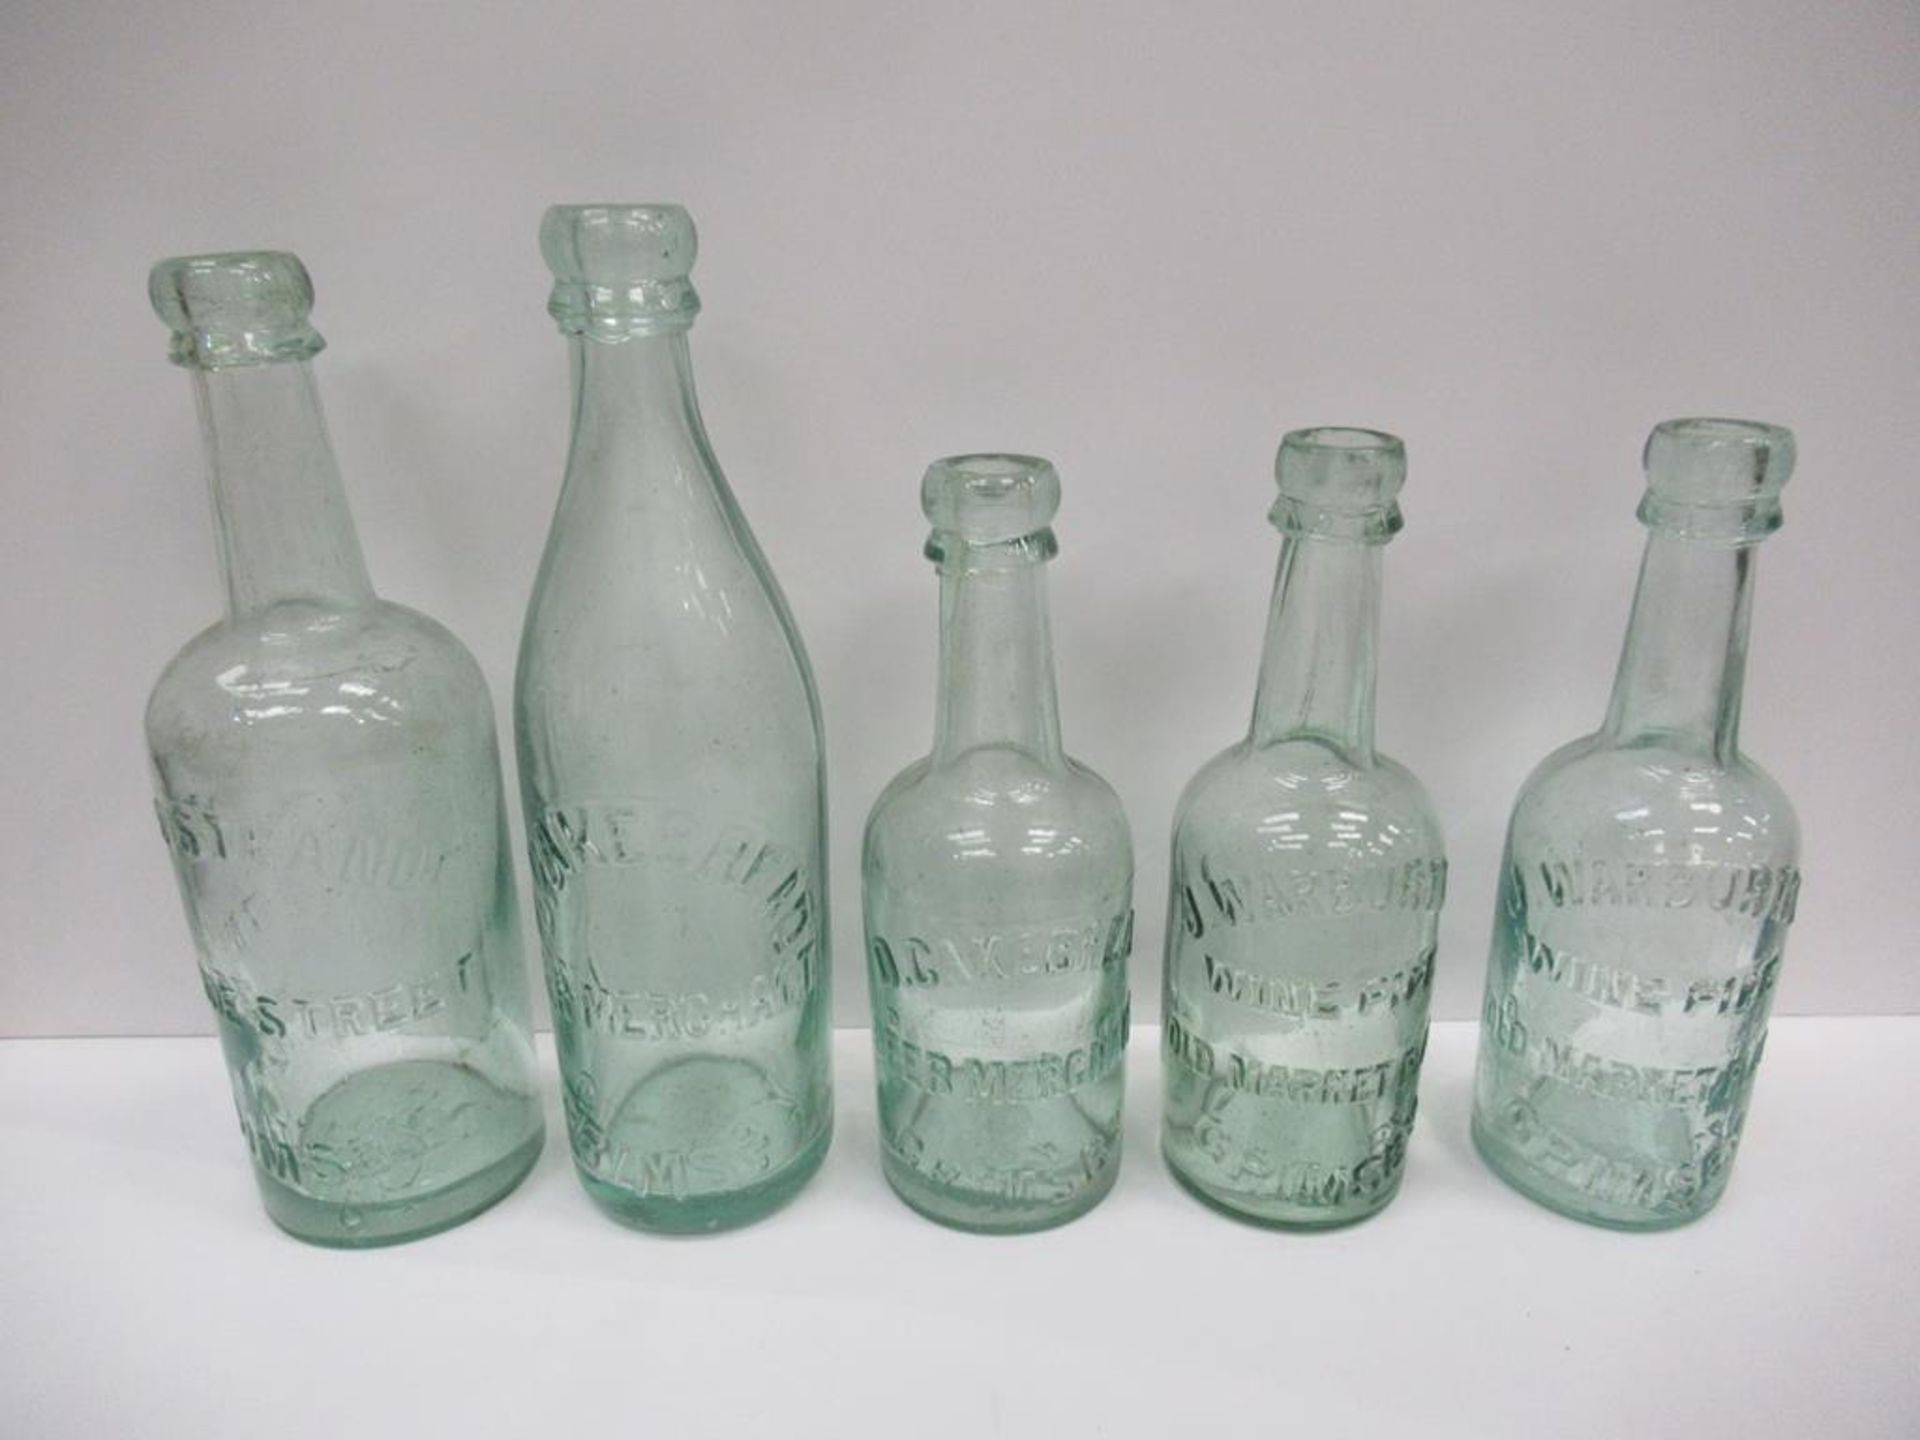 5x Grimsby bottles including Otto Strand (1), D. Cakebread Beer Merchant (2) and J. Warburton Wine P